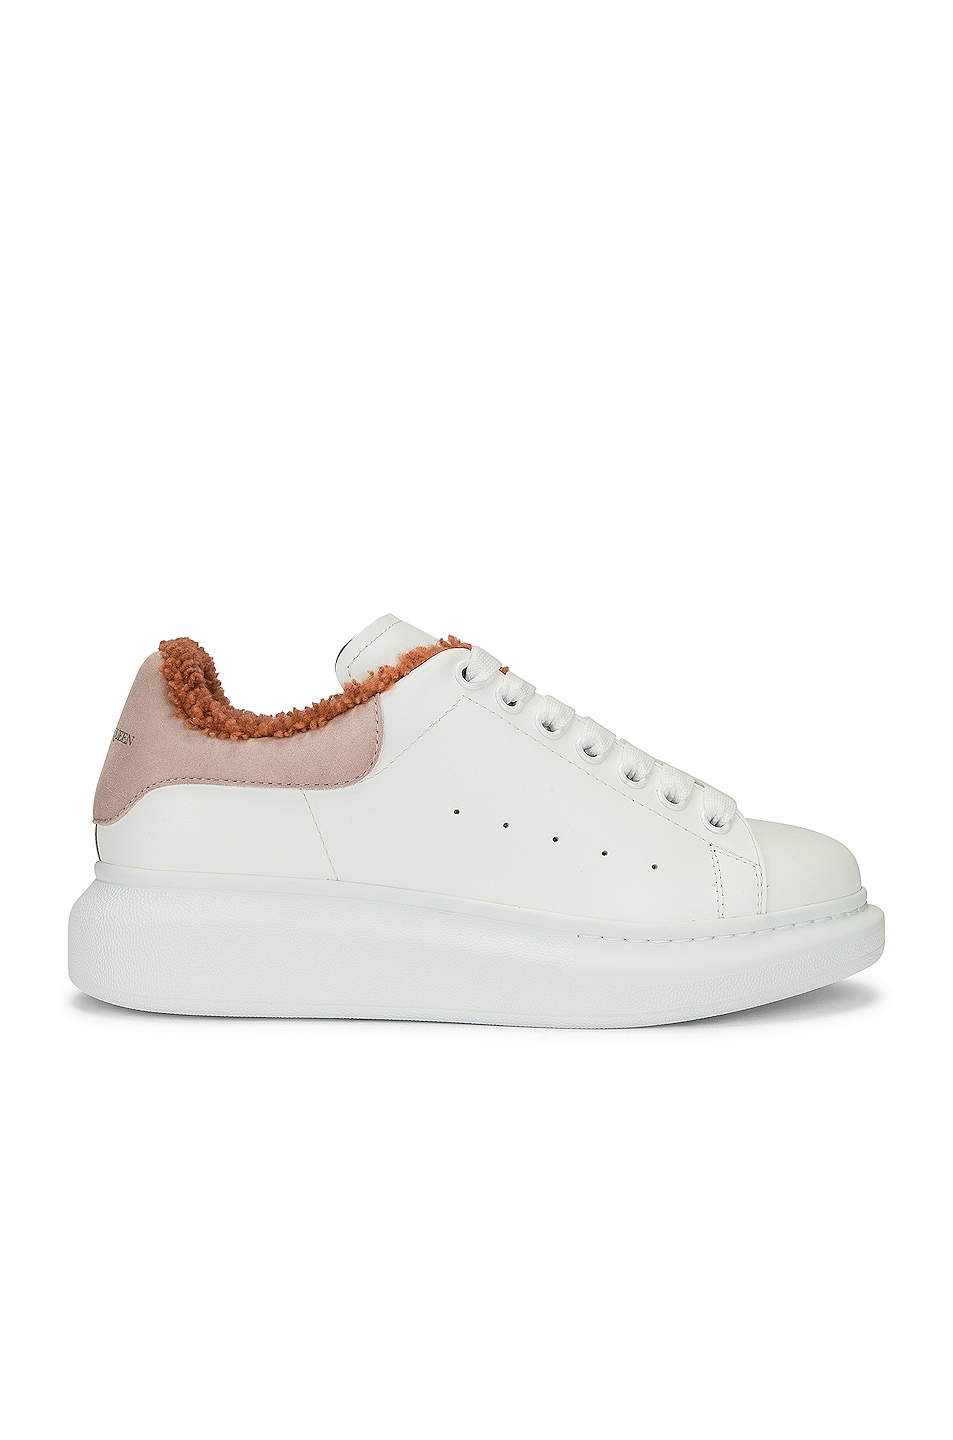 Image 1 of Alexander McQueen Leather Shearling Sneakers in White & Tea Rose